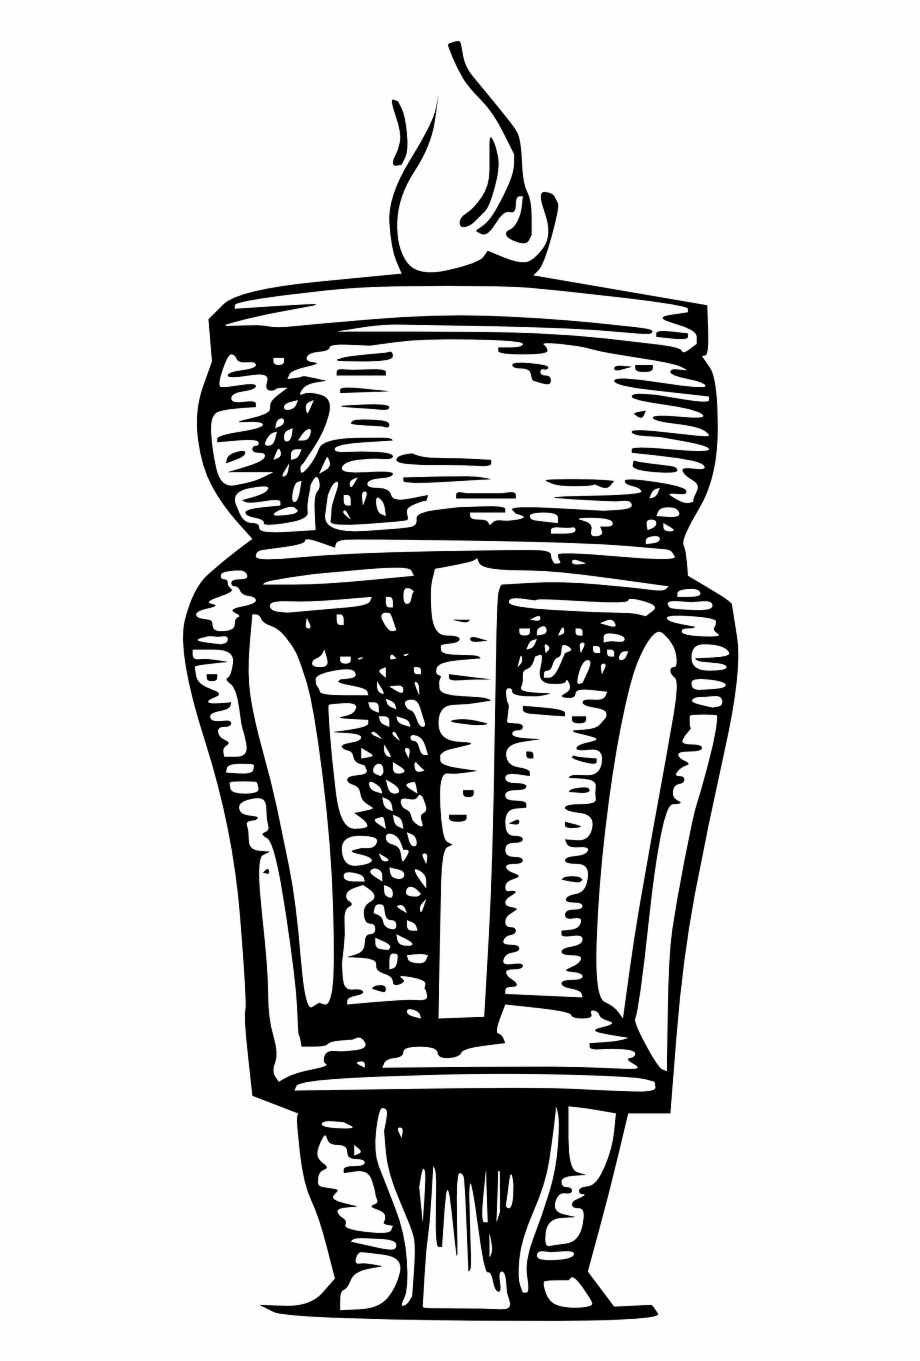 flaming torch clipart black and white